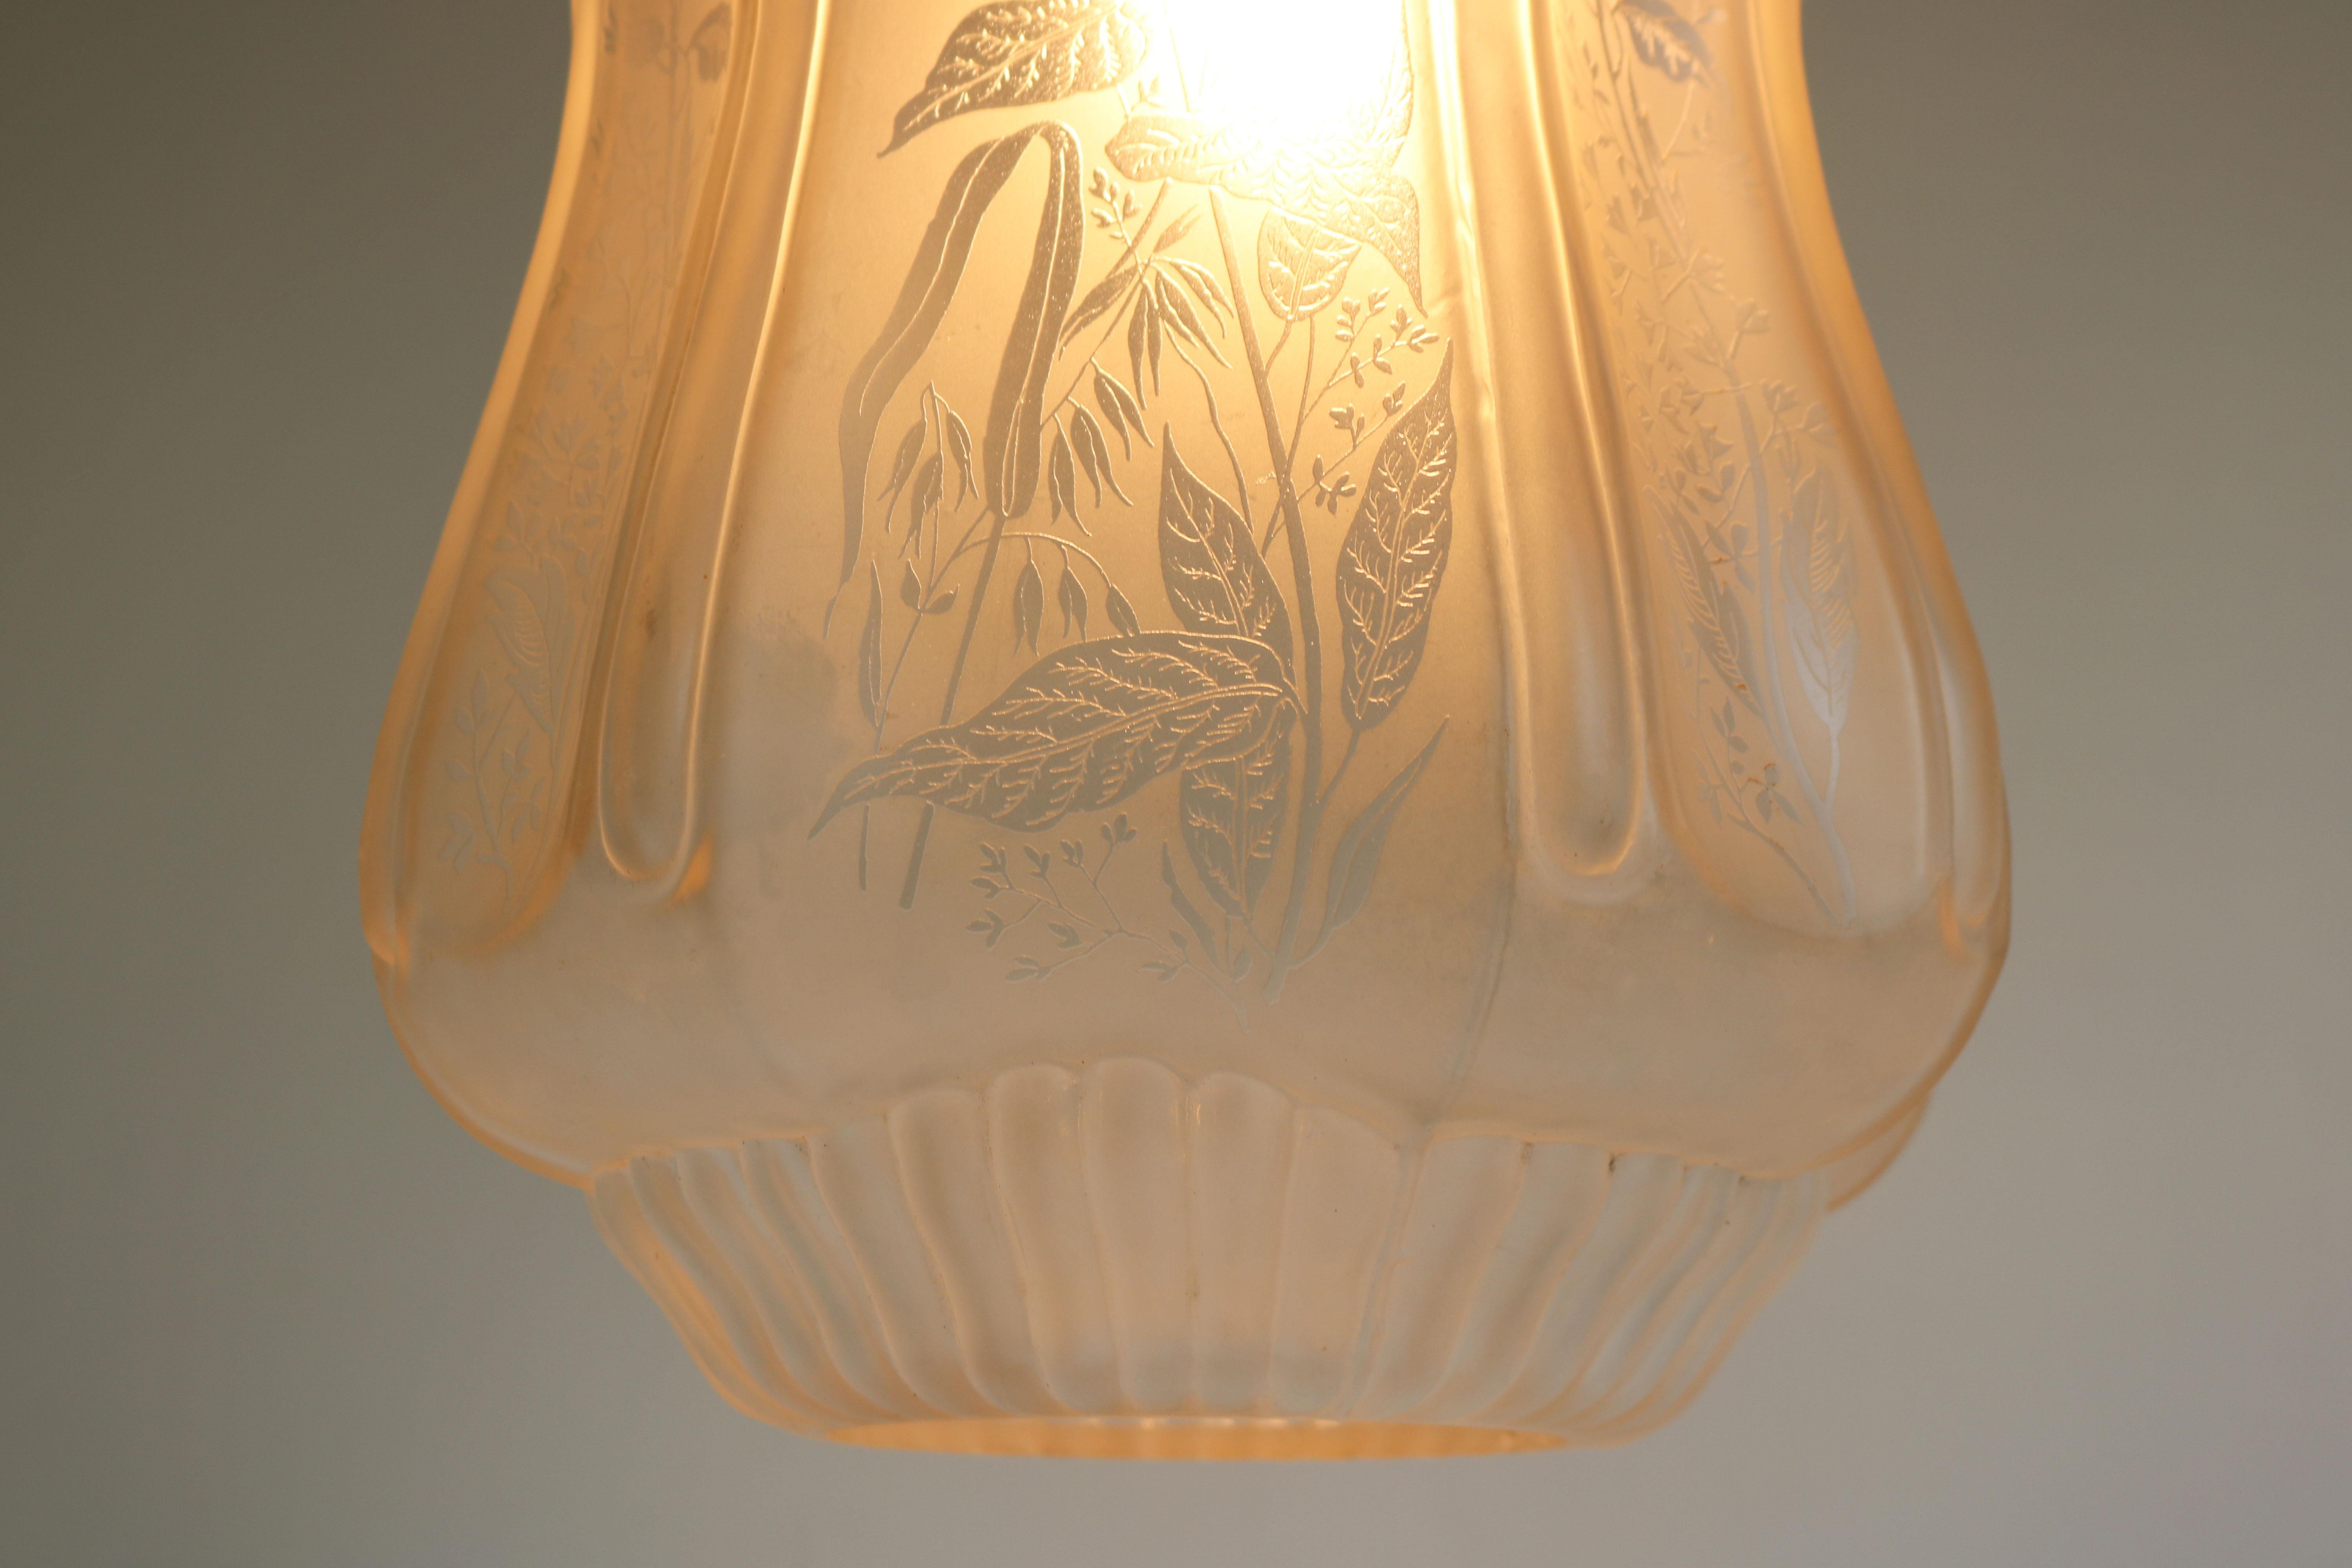 Exquisite large Art Nouveau pendant light with Floral carved glass shade from France 1910. 
The large glass shade is breathtaking ! Made from thick frosted glass and decorated with highly detailed floral carvings.
When lit the carvings are